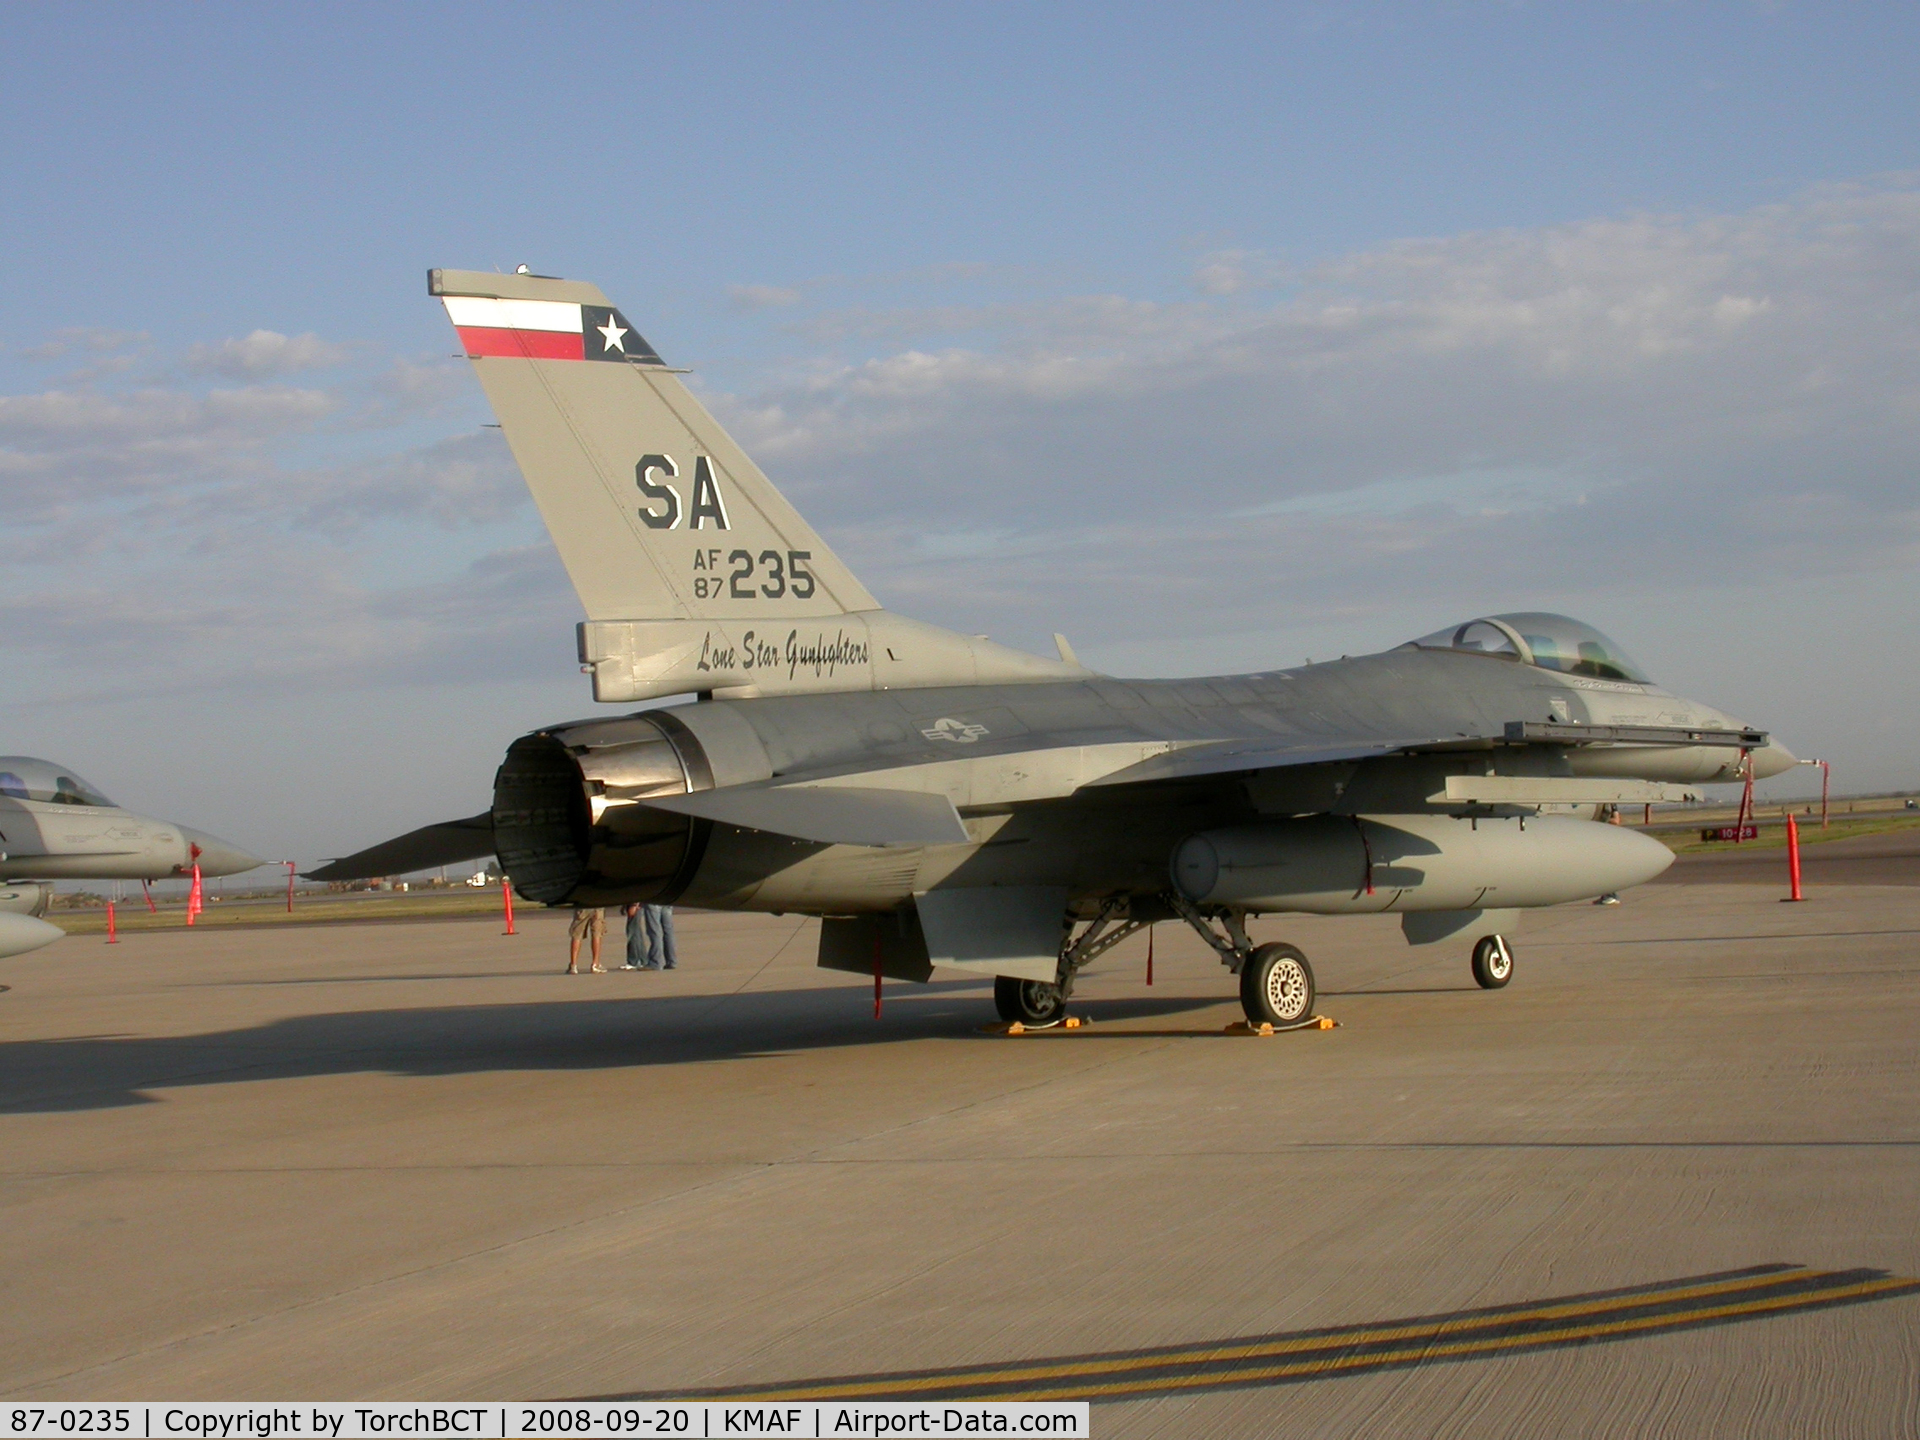 87-0235, 1987 General Dynamics F-16C Fighting Falcon C/N 5C-496, Lone Star Gunfighters Falcon at KMAF for Fina-CAF Airsho 2008.